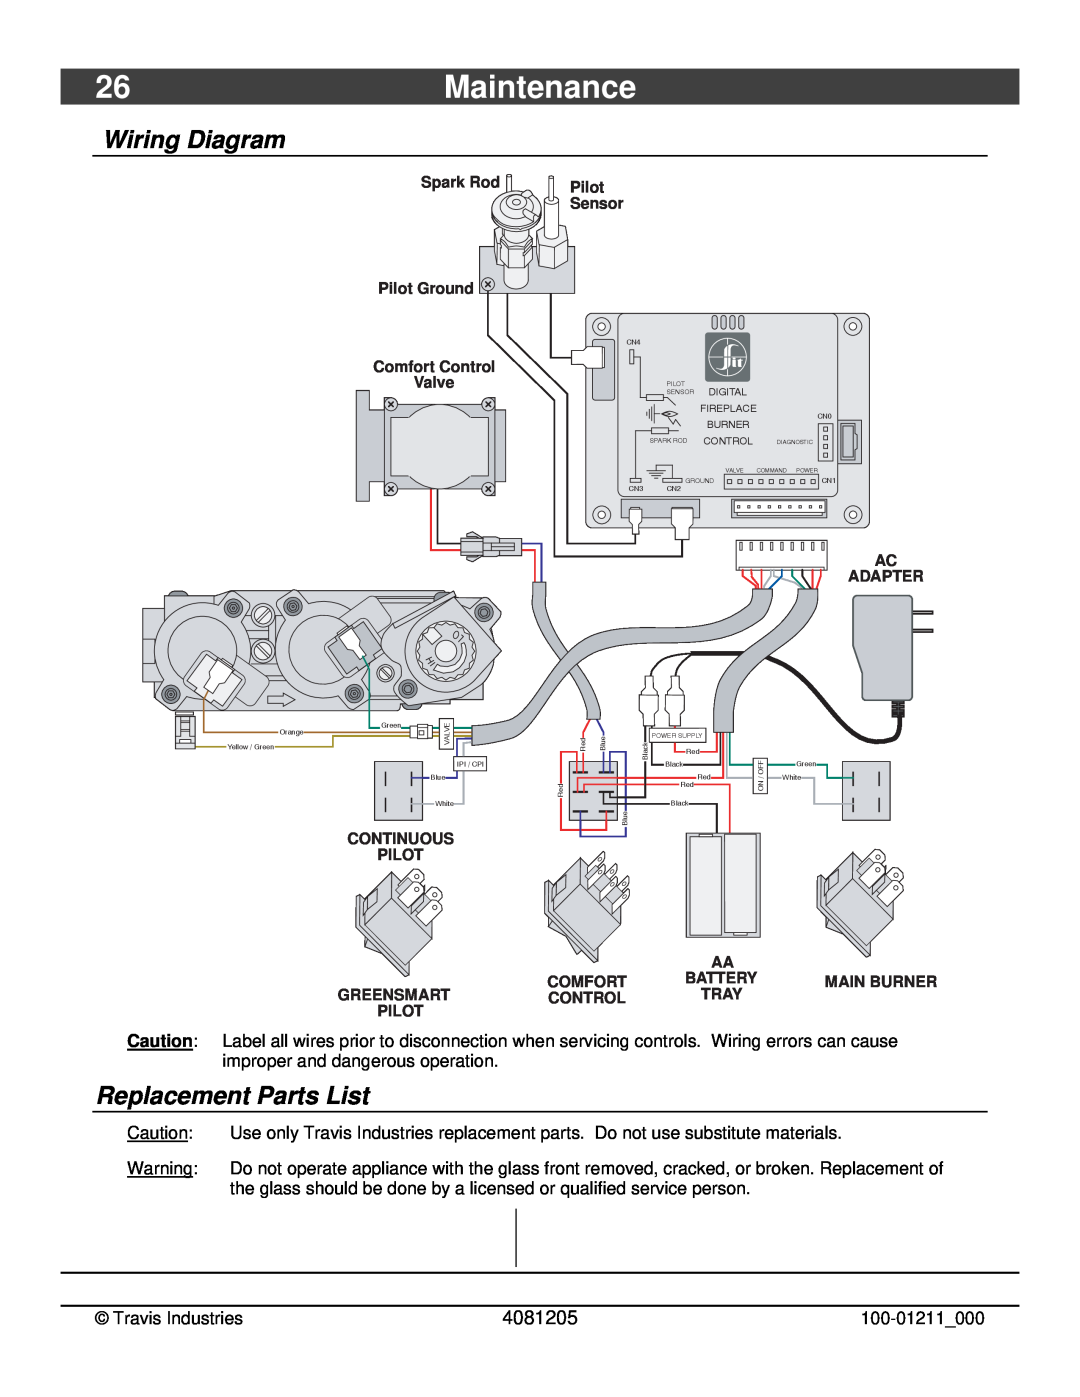 Avalon Stoves 564 SS owner manual 26Maintenance, Wiring Diagram, Replacement Parts List, 4081205 